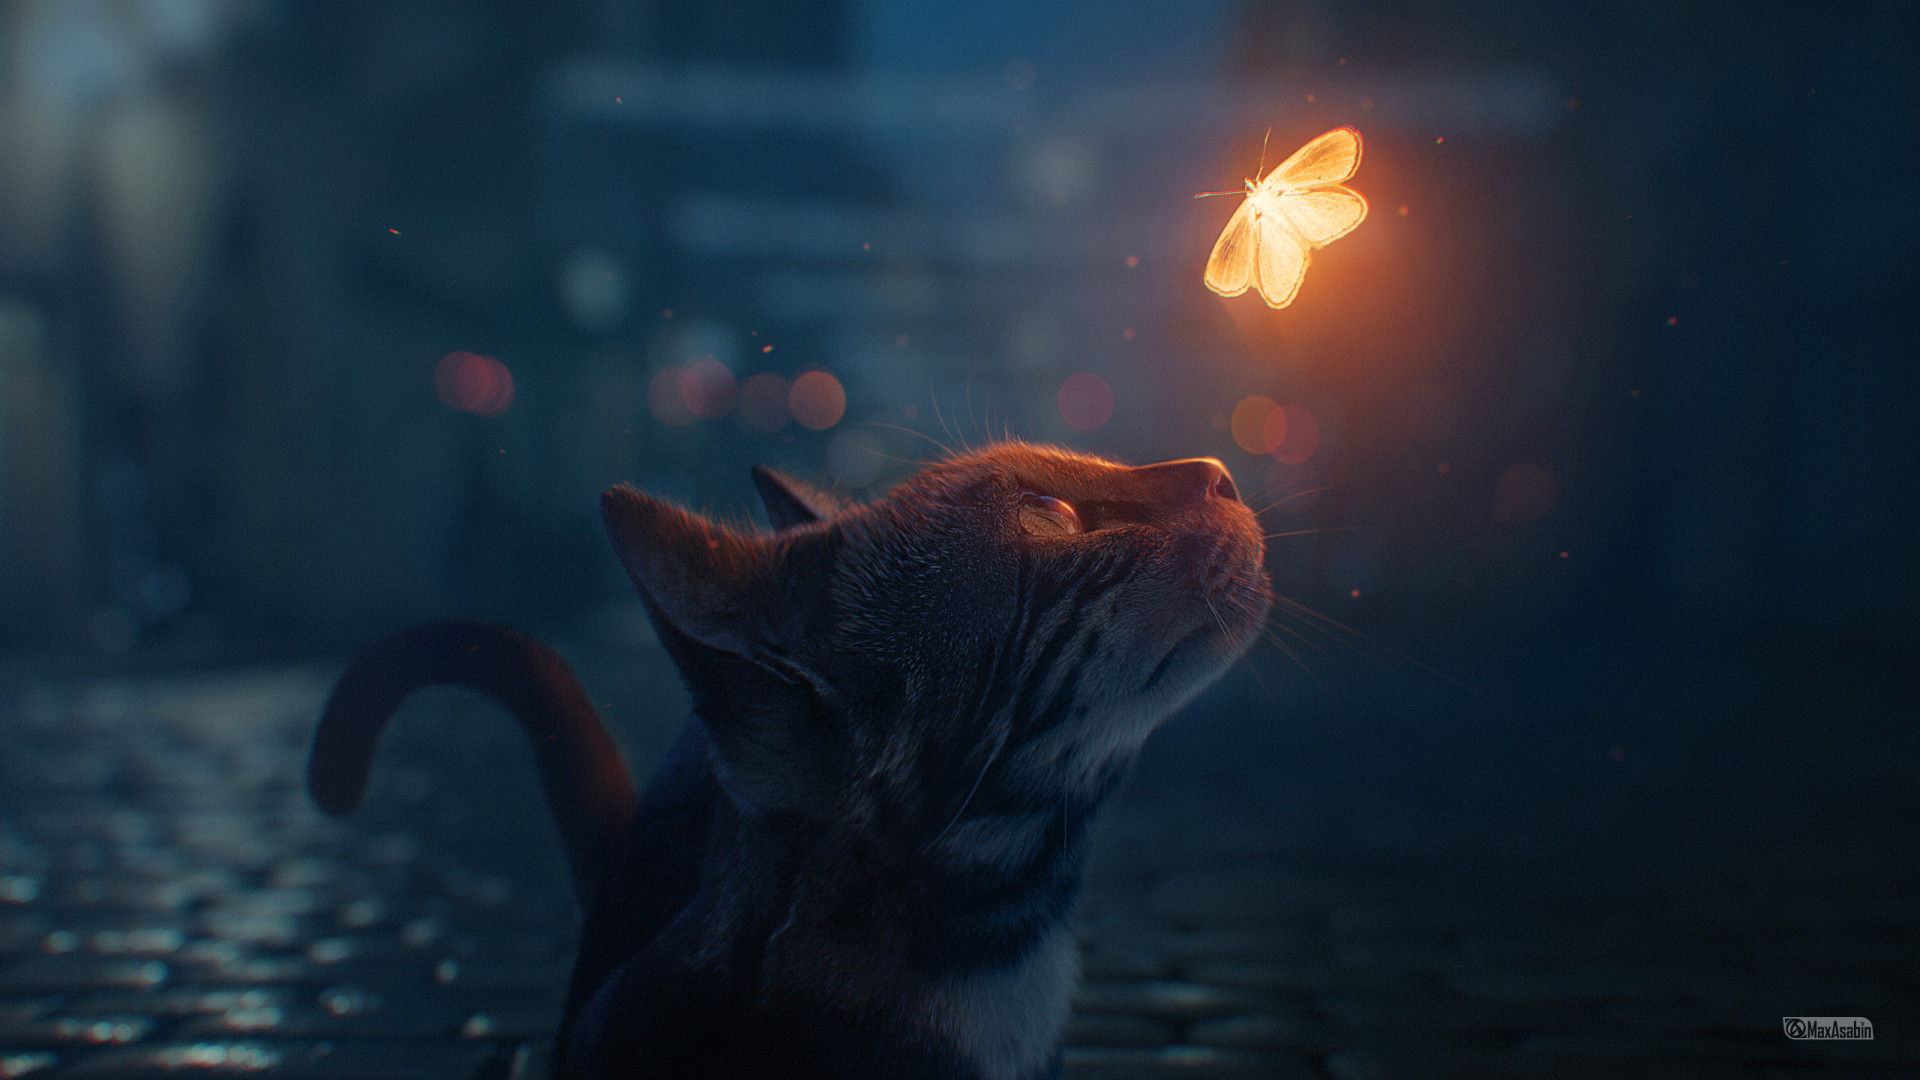 The cat and the butterfly wallpaper 1920x1080